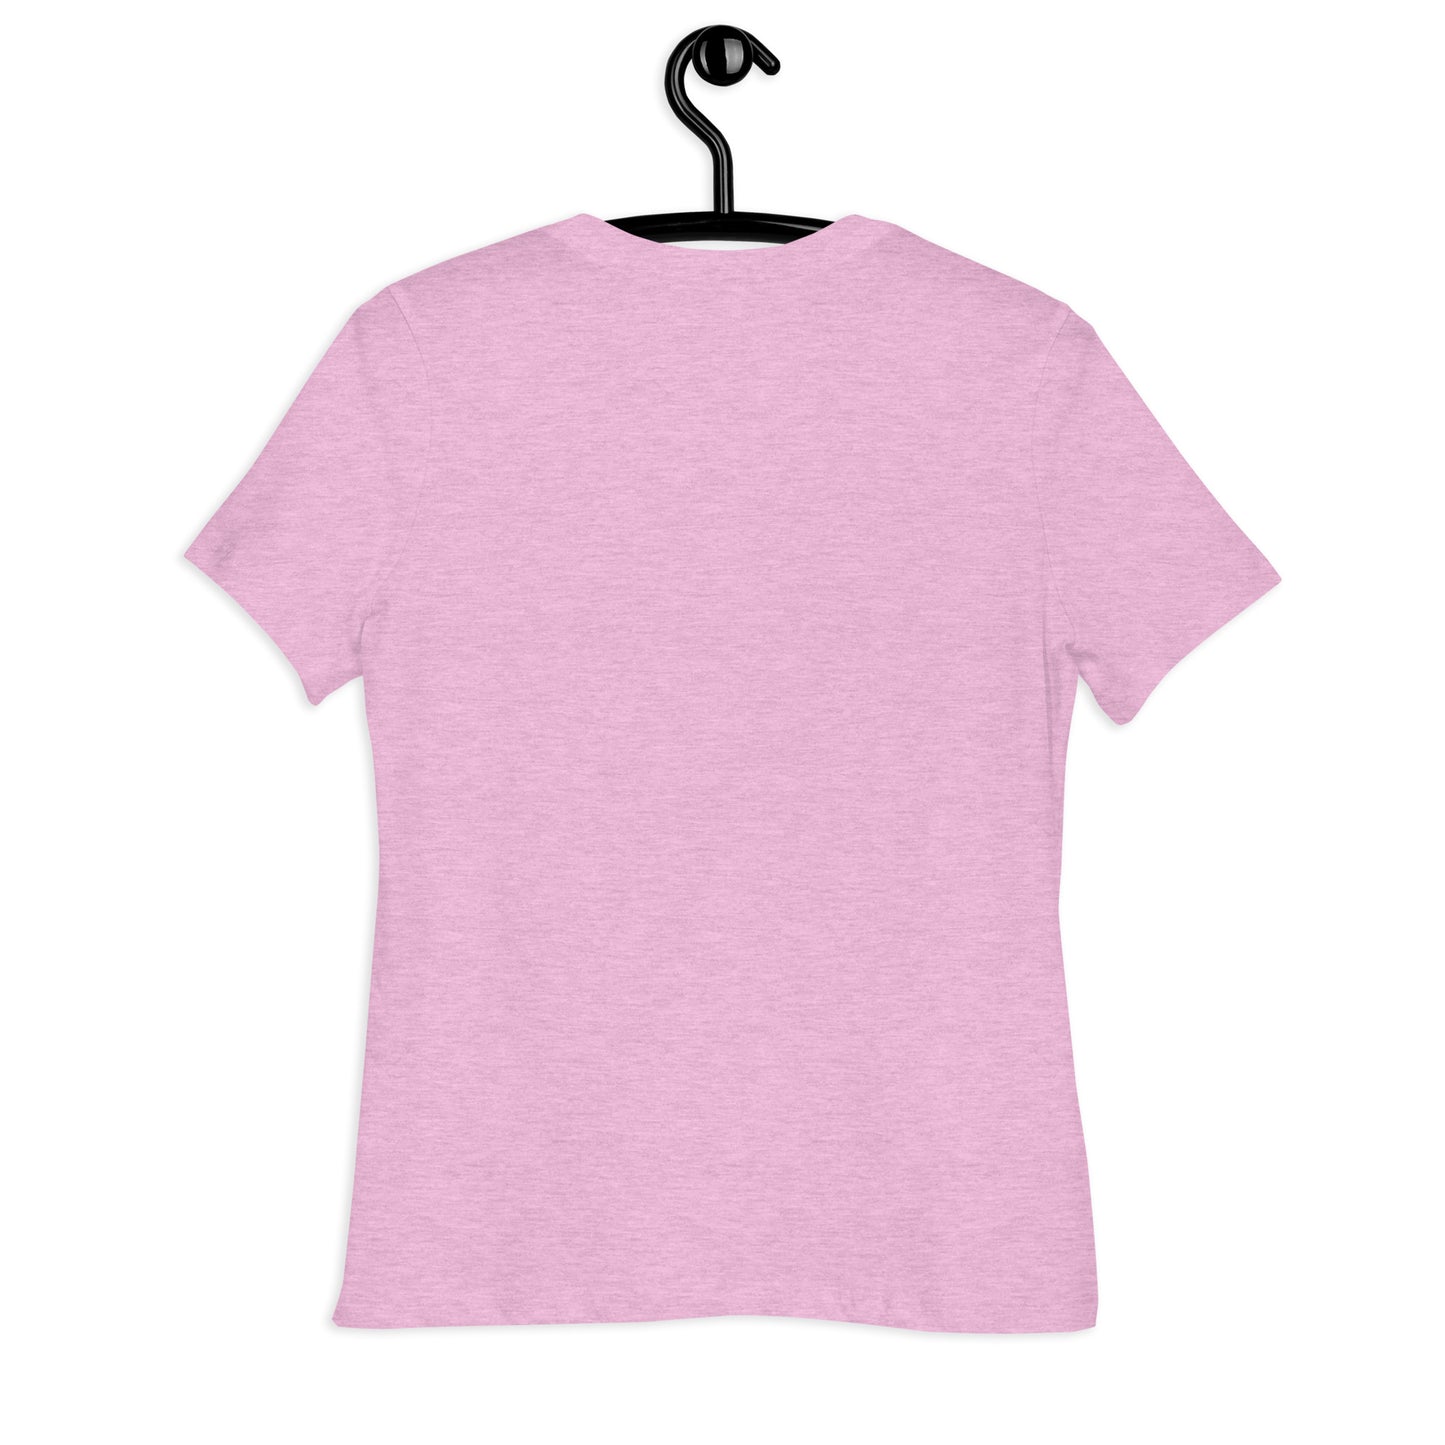 A Penny For Your Thoughts Seems A Little Pricey Bella Canvas Relaxed Women's T-Shirt